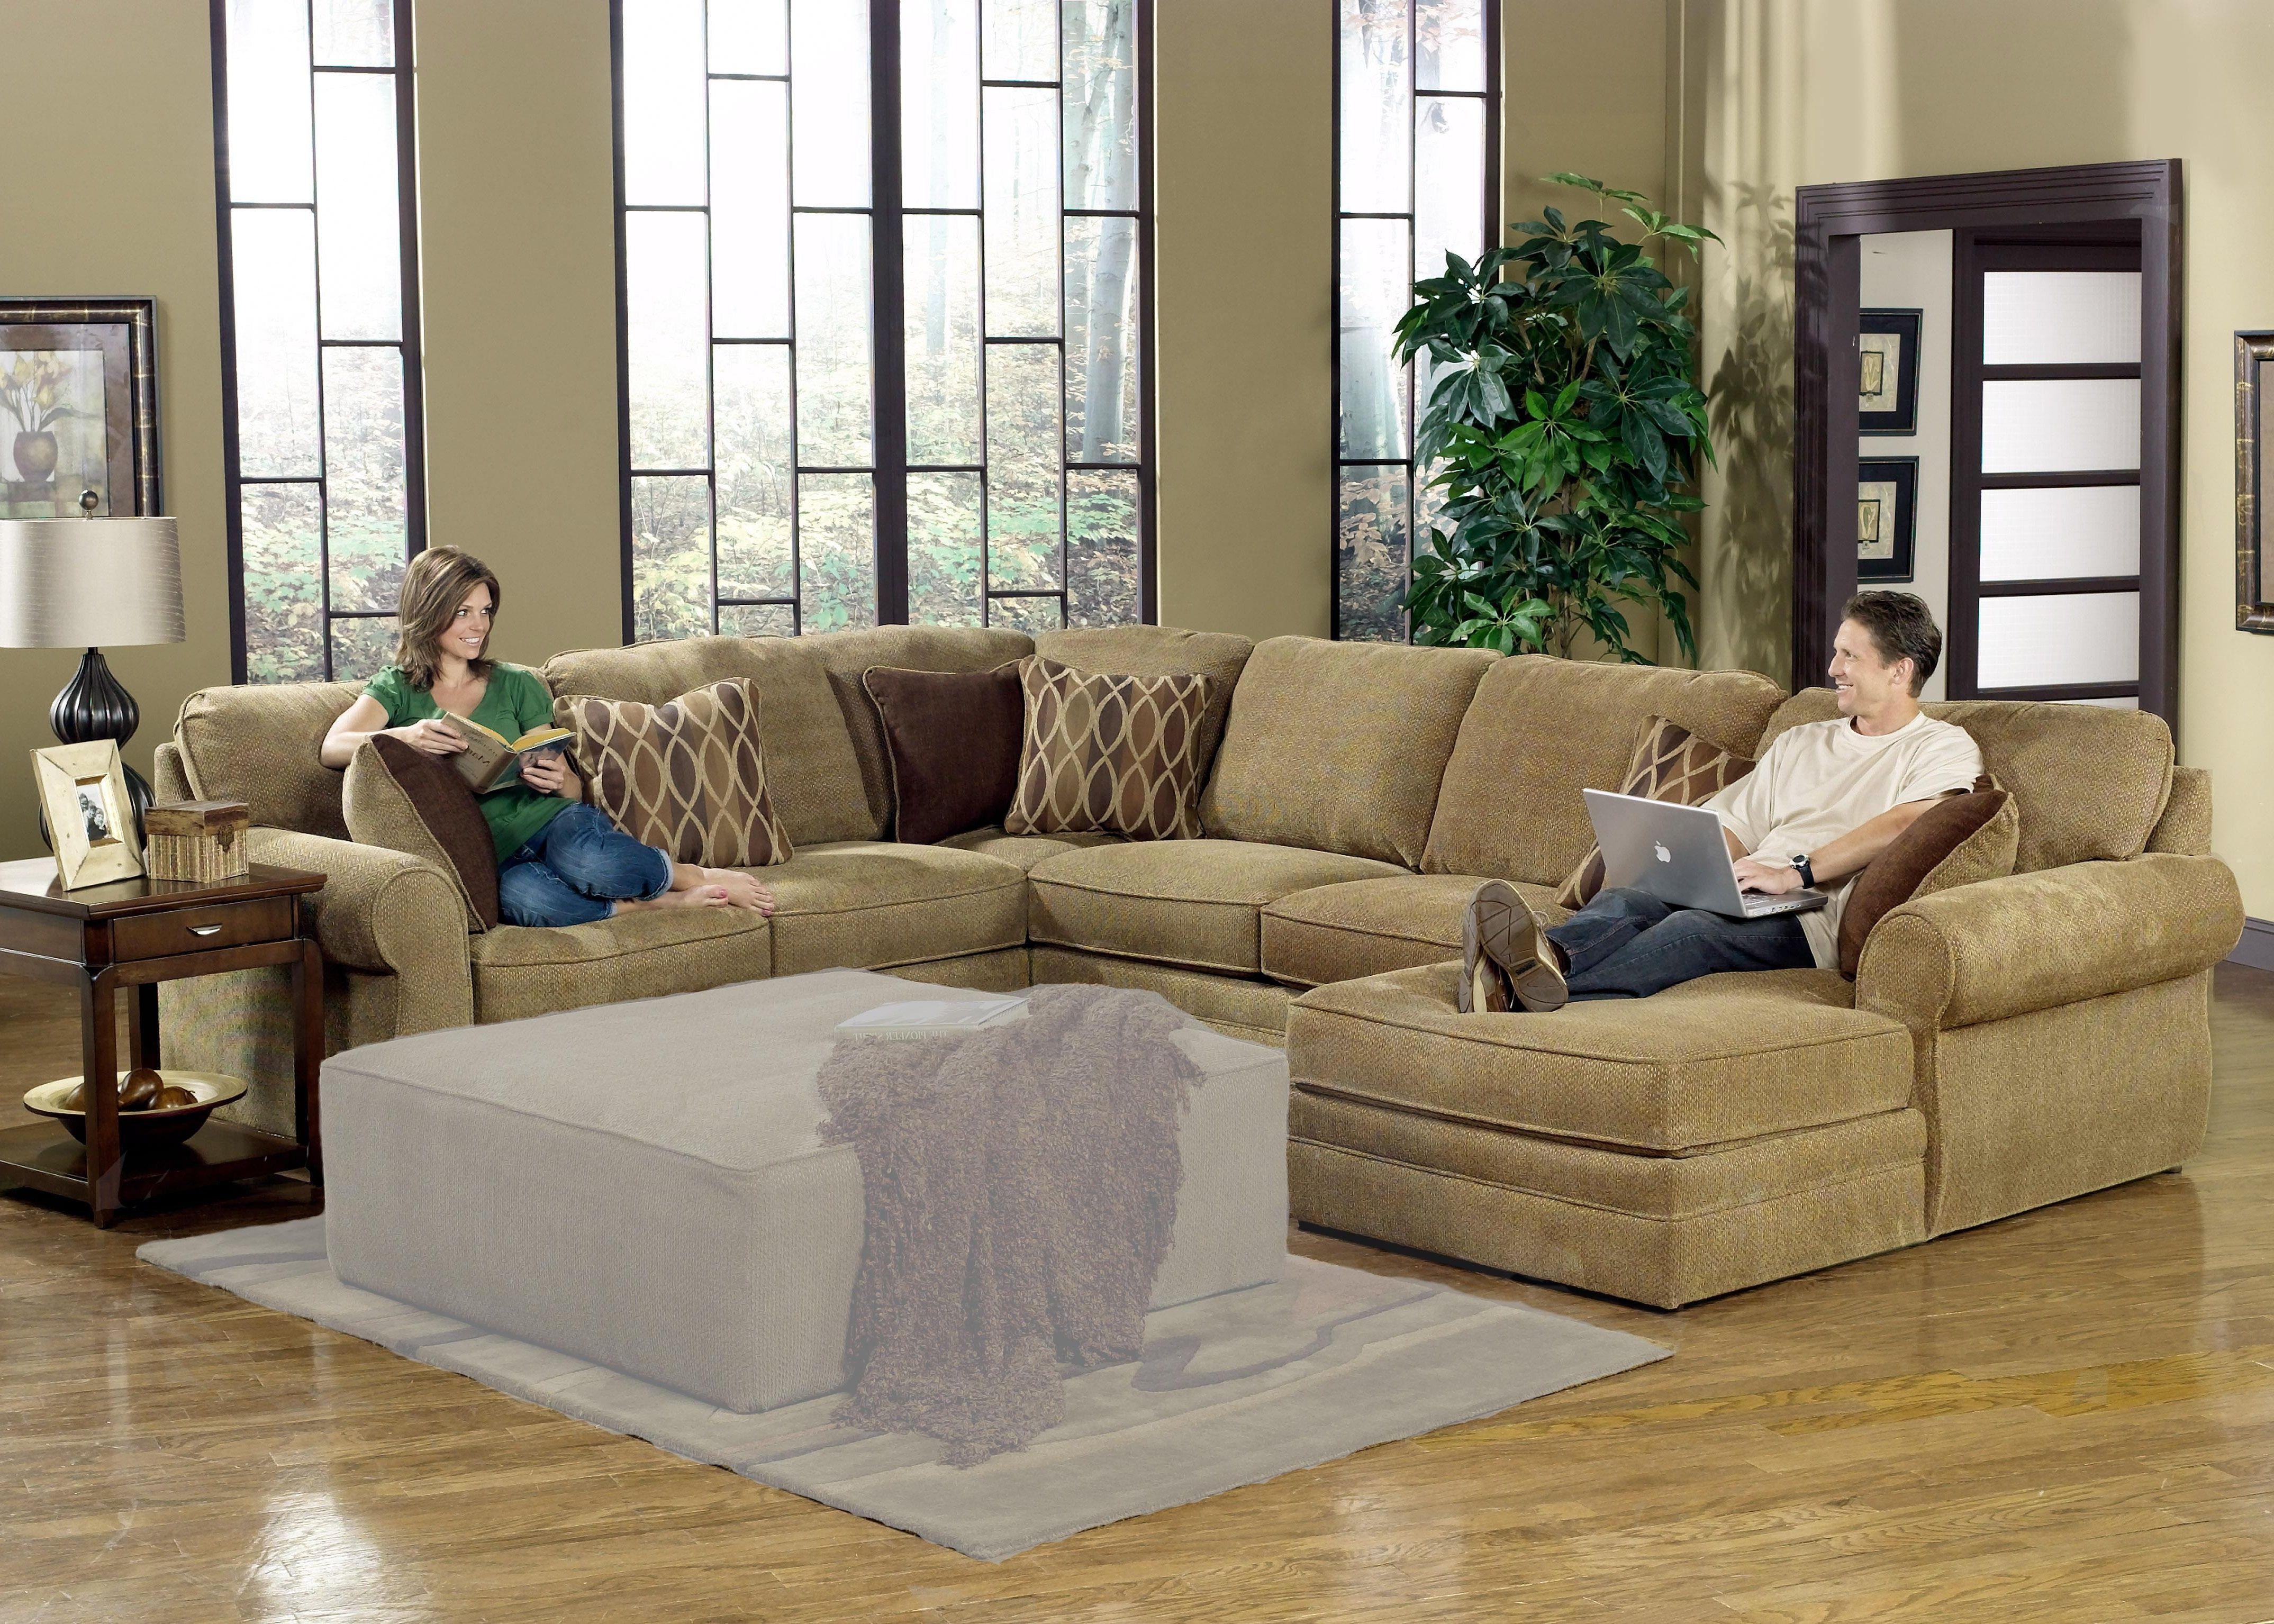 Most Up To Date Big U Shaped Couches Throughout Sectional Sofa Design: Adorable Large U Shaped Sectional Sofa U (View 1 of 20)